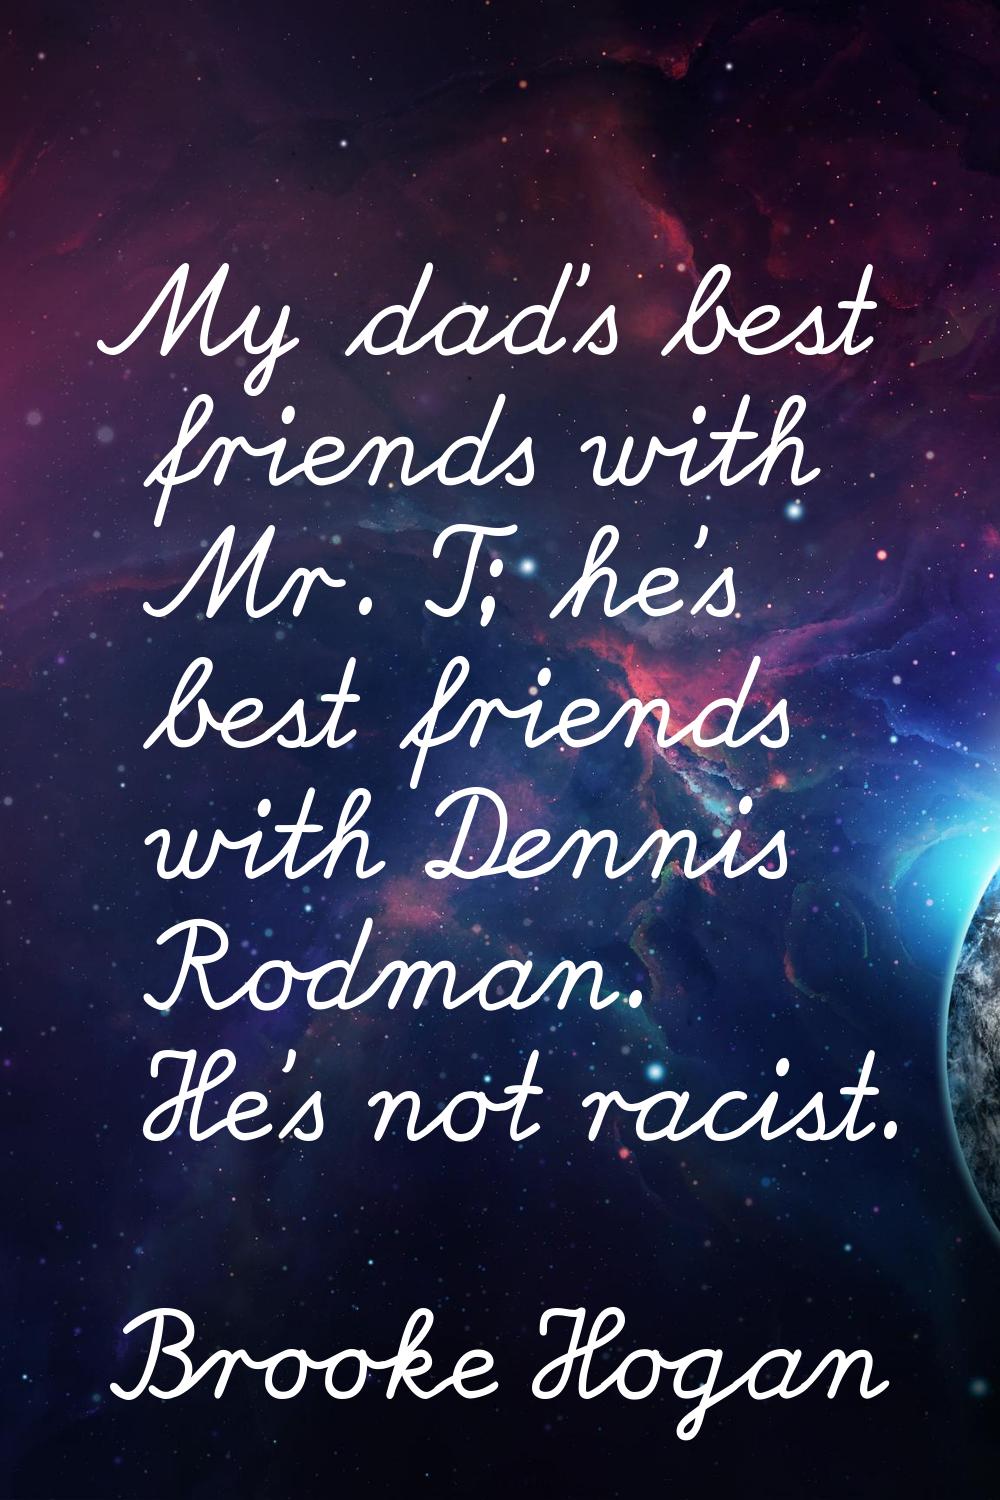 My dad's best friends with Mr. T; he's best friends with Dennis Rodman. He's not racist.